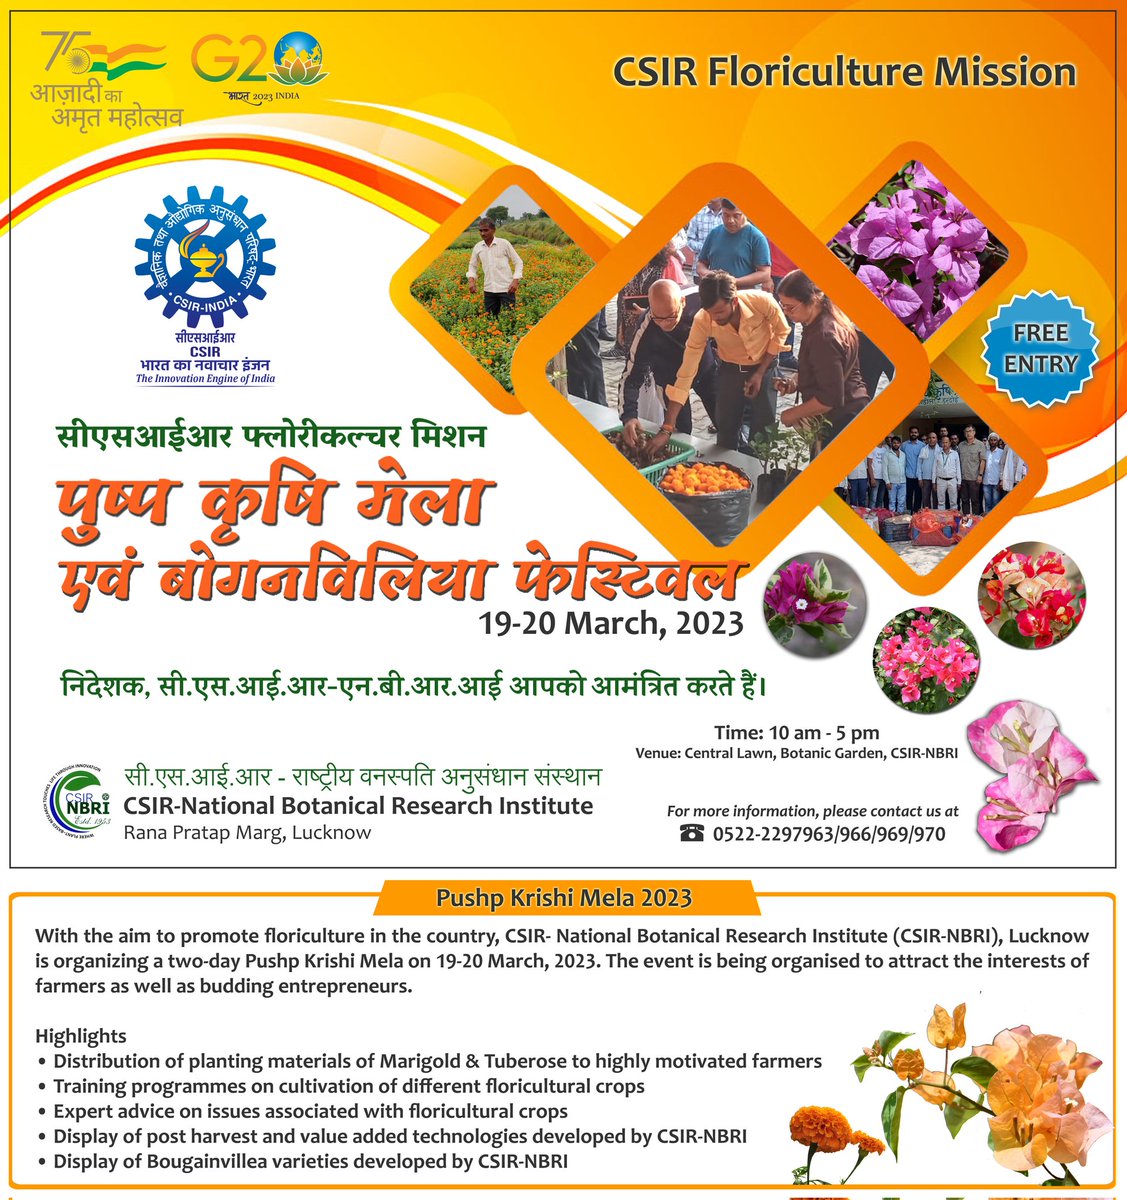 @csirnbrilko organizing #Pushp_Krishi_Mela_and_Bougainvillea_Festival during March 19-20, 2023 under #CSIRFloricultureMission
For participation and enquiry pl contact: 0522-2297963/66/69/70